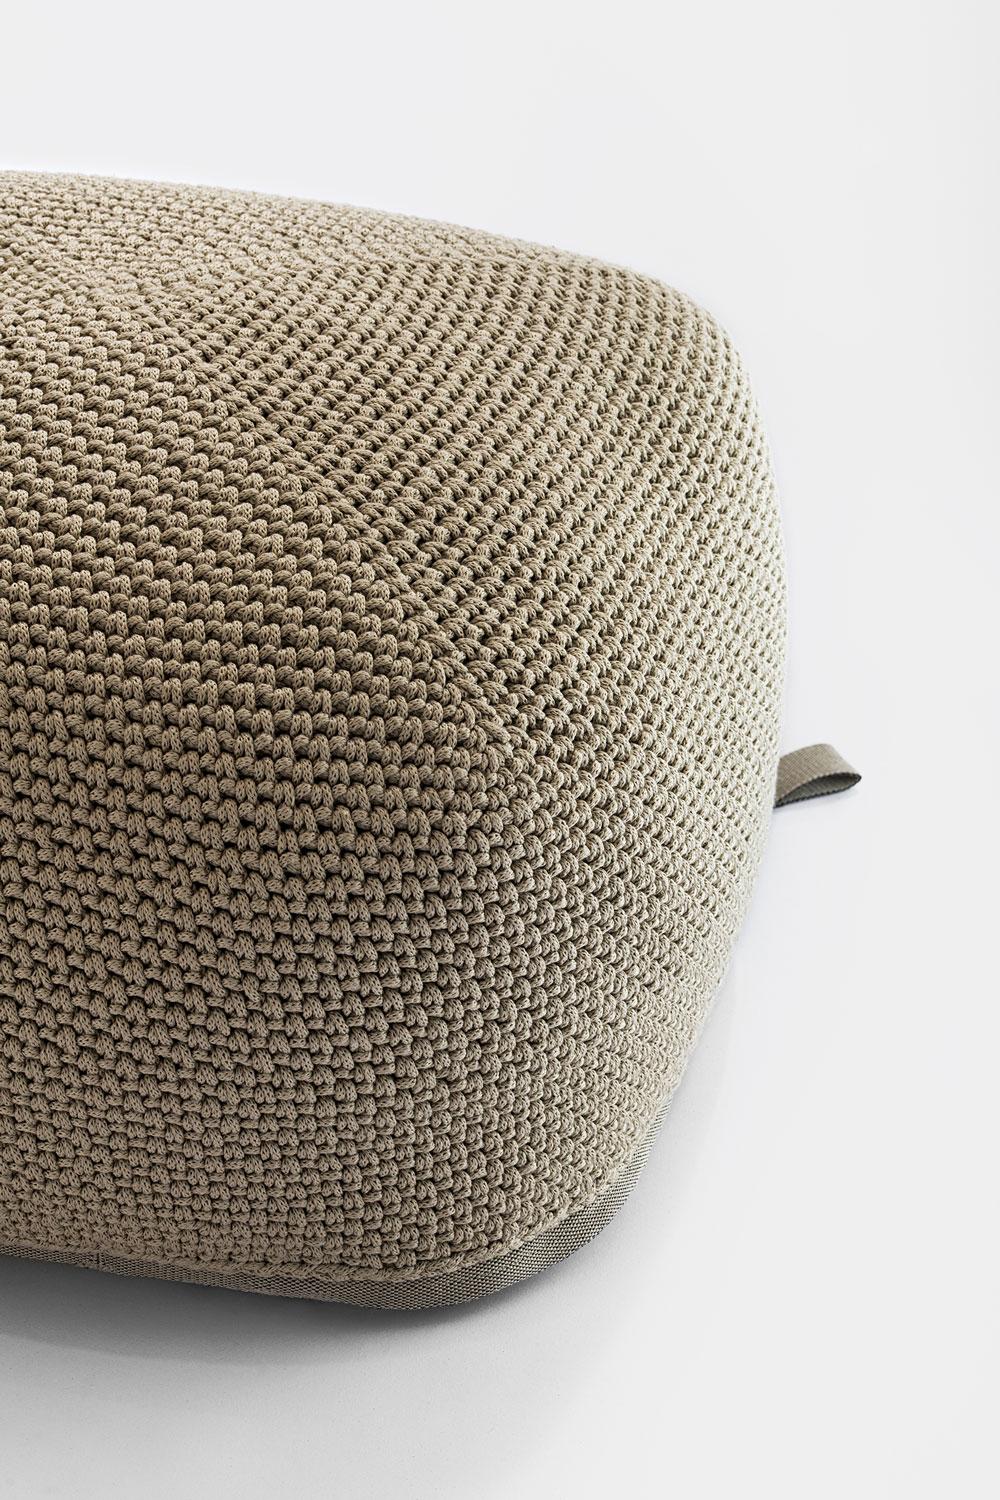 Contemporary 21st Century Asian Natural Cream Outdoor Indoor Handmade Pouf For Sale